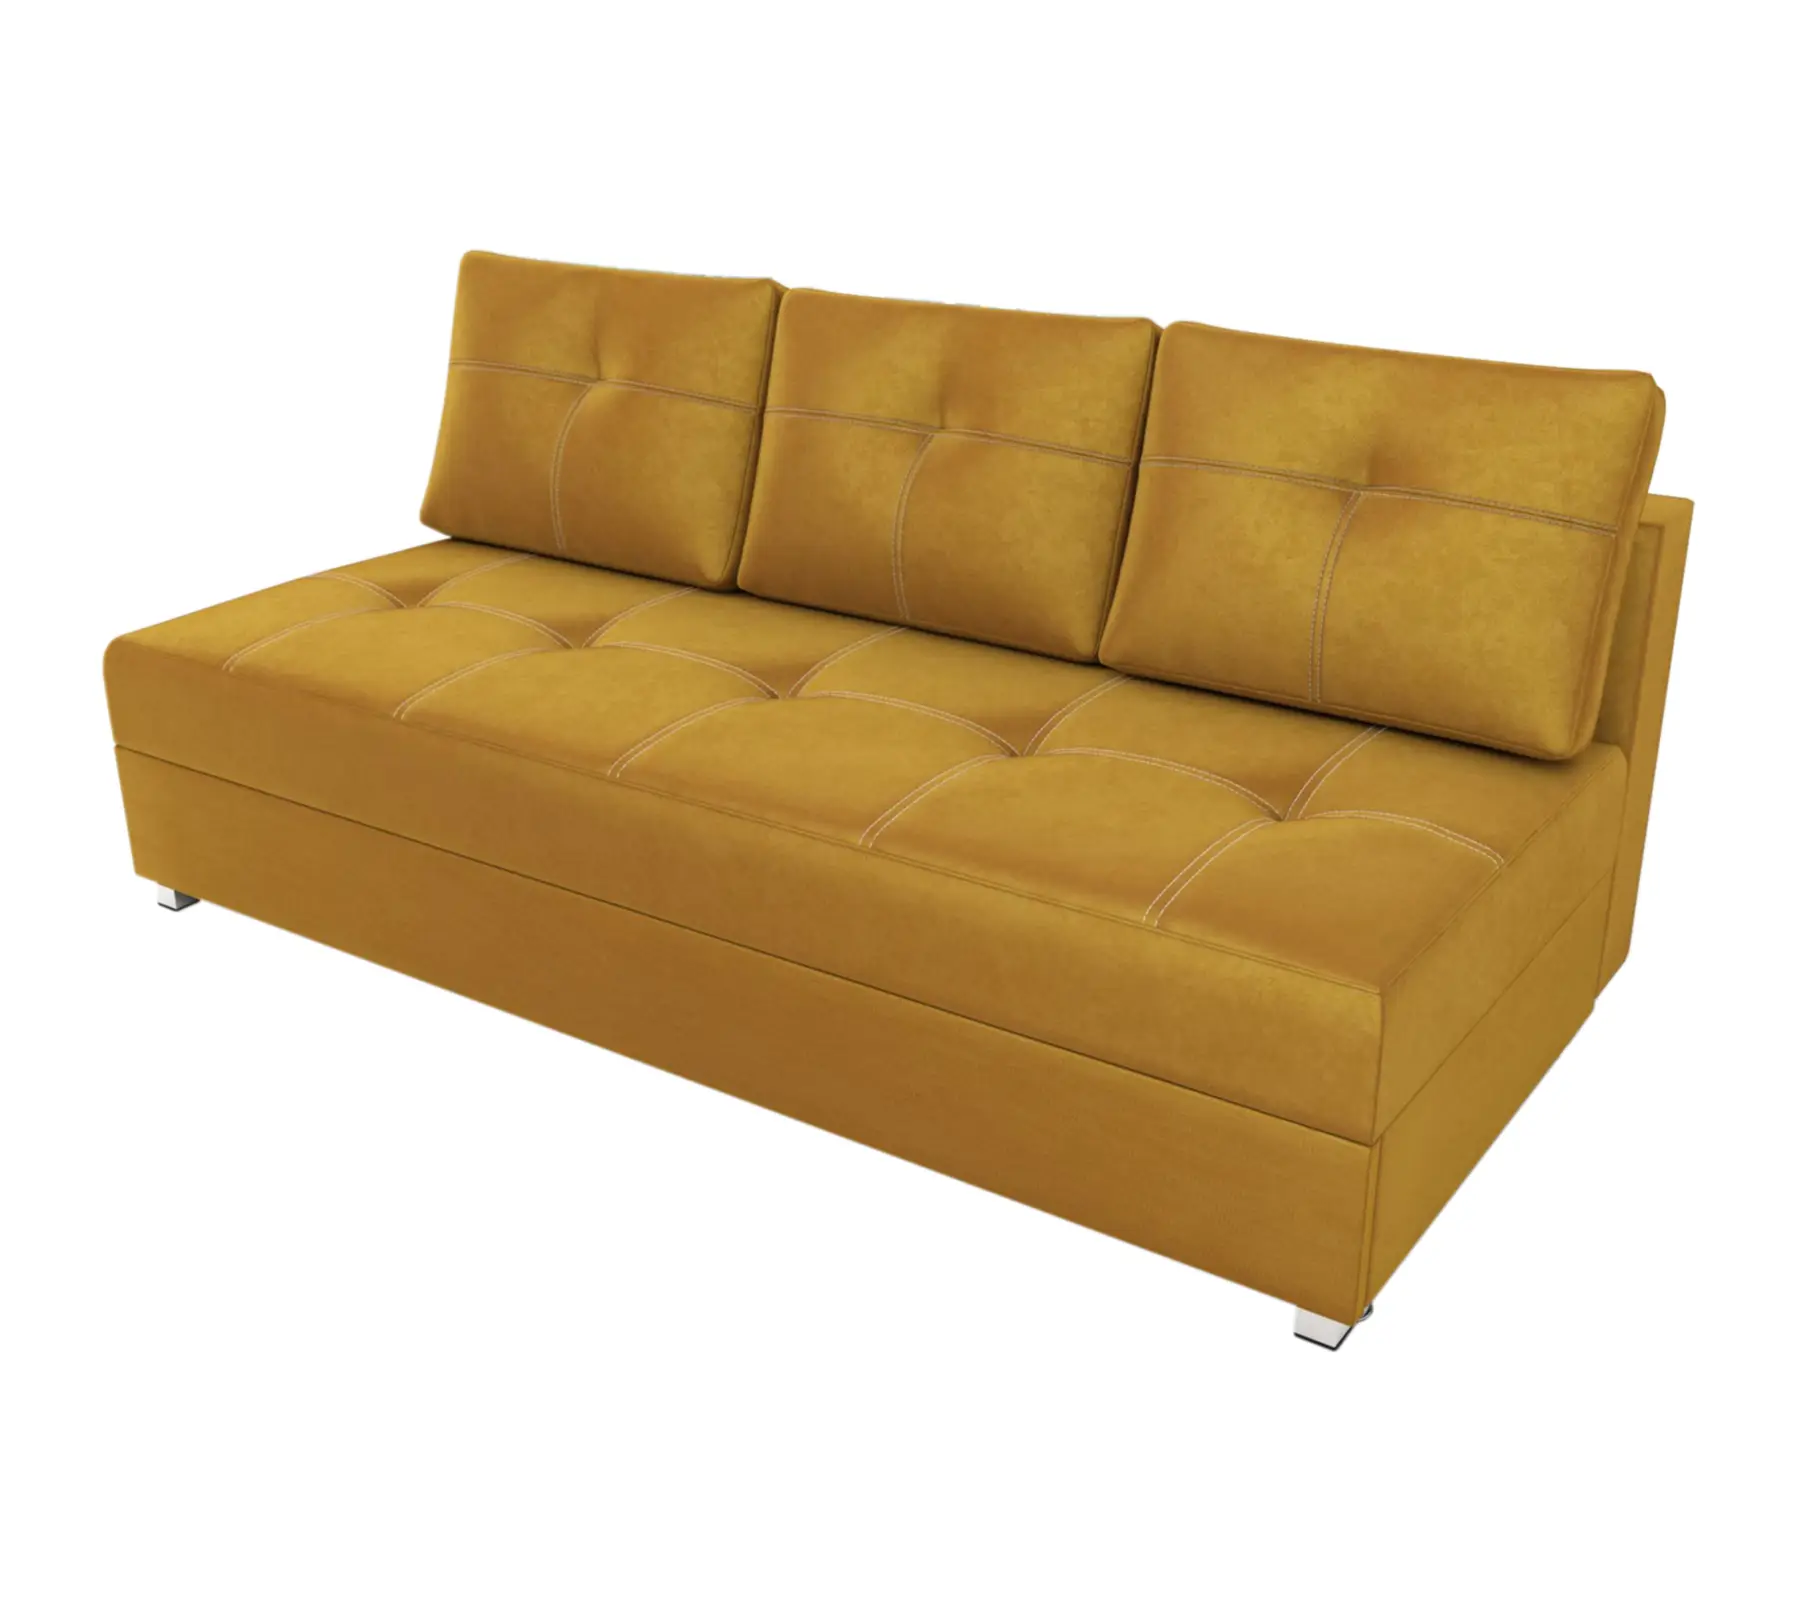 Sofa mit Schlafunktion CANALE